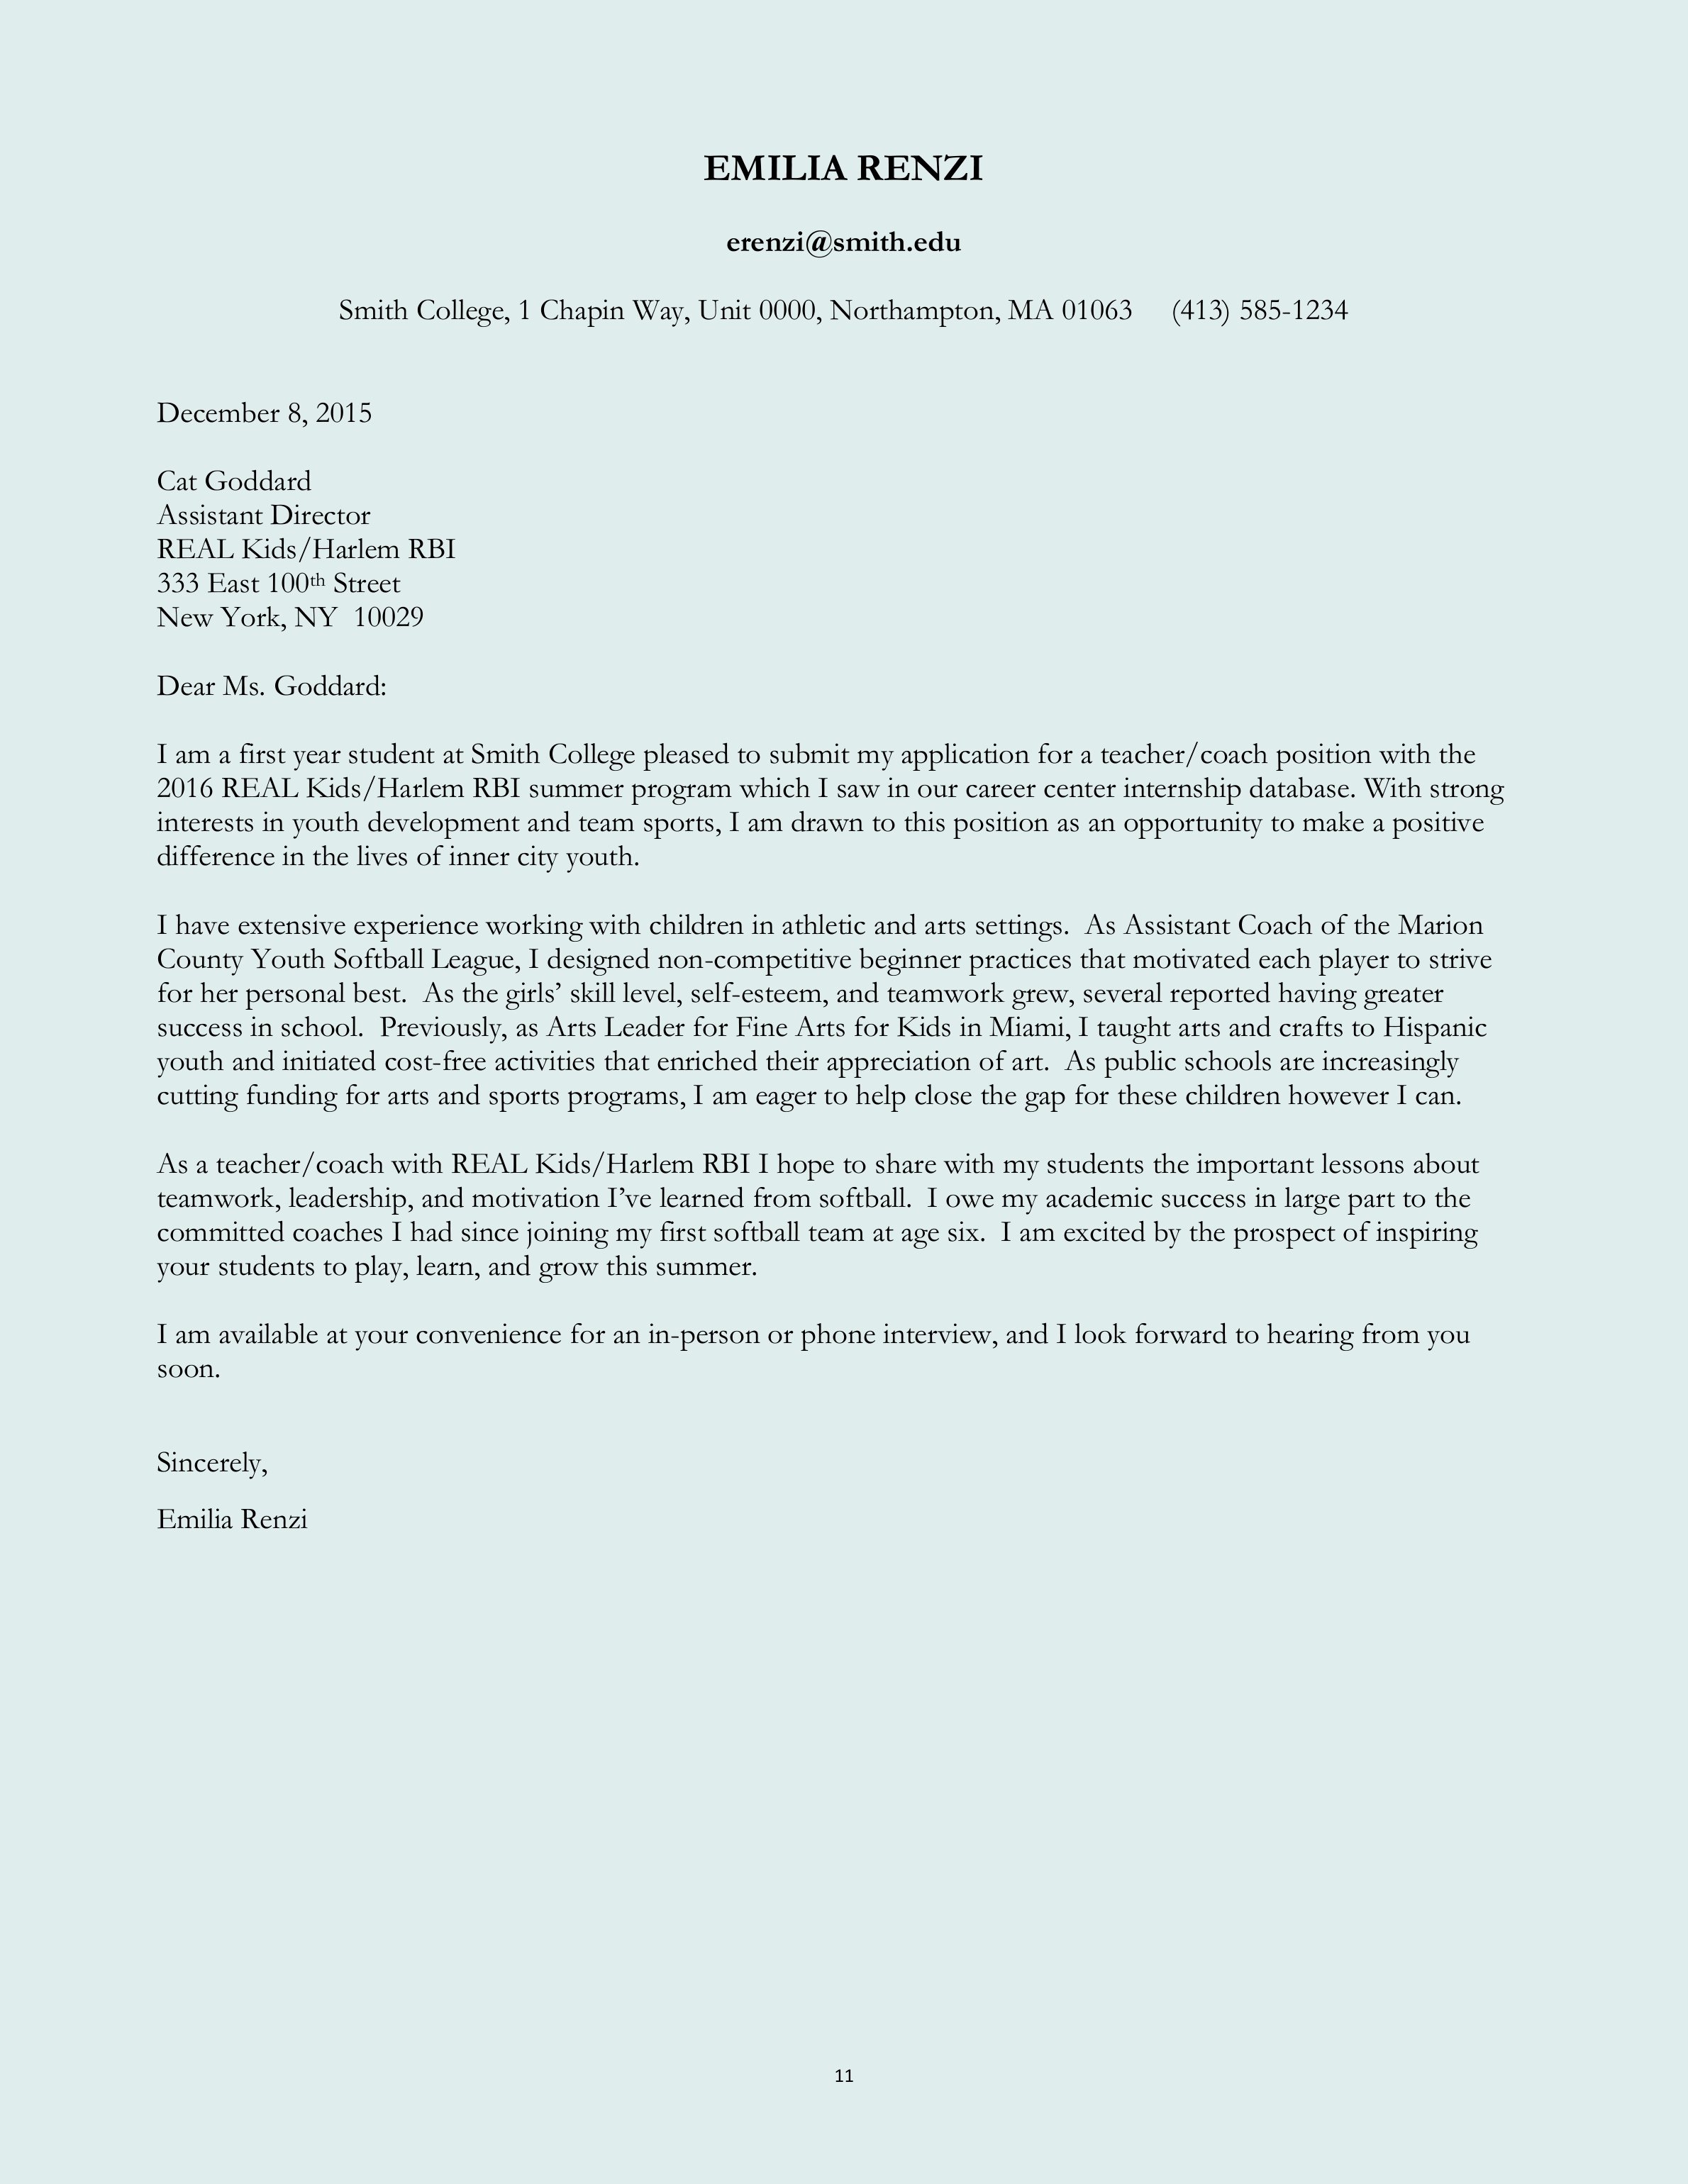 Cover Letter format Creating An Executive Cover Letter